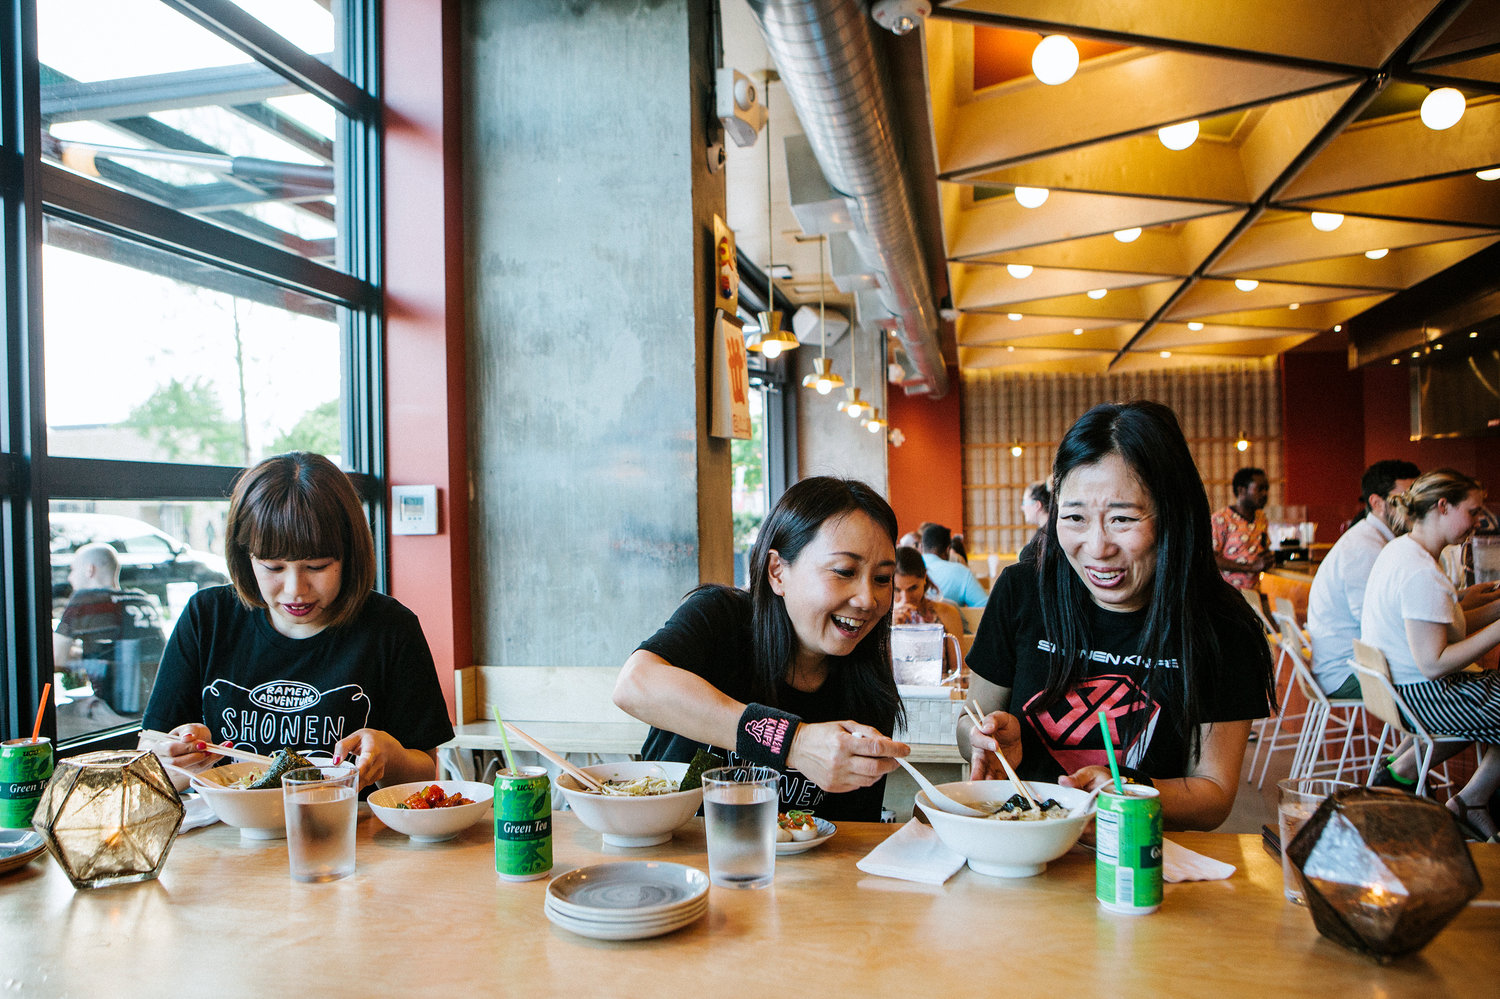 (Left to right) Risa, Naoko and Atsuko of the band Shonen Knife eat ramen at Haikan in Washington, D.C., before playing a show. D.C. was one of their stops on a self-titled "Ramen Adventure Tour" of the U.S. By night, they play gigs. By day, they sample ramen in cities across the country.